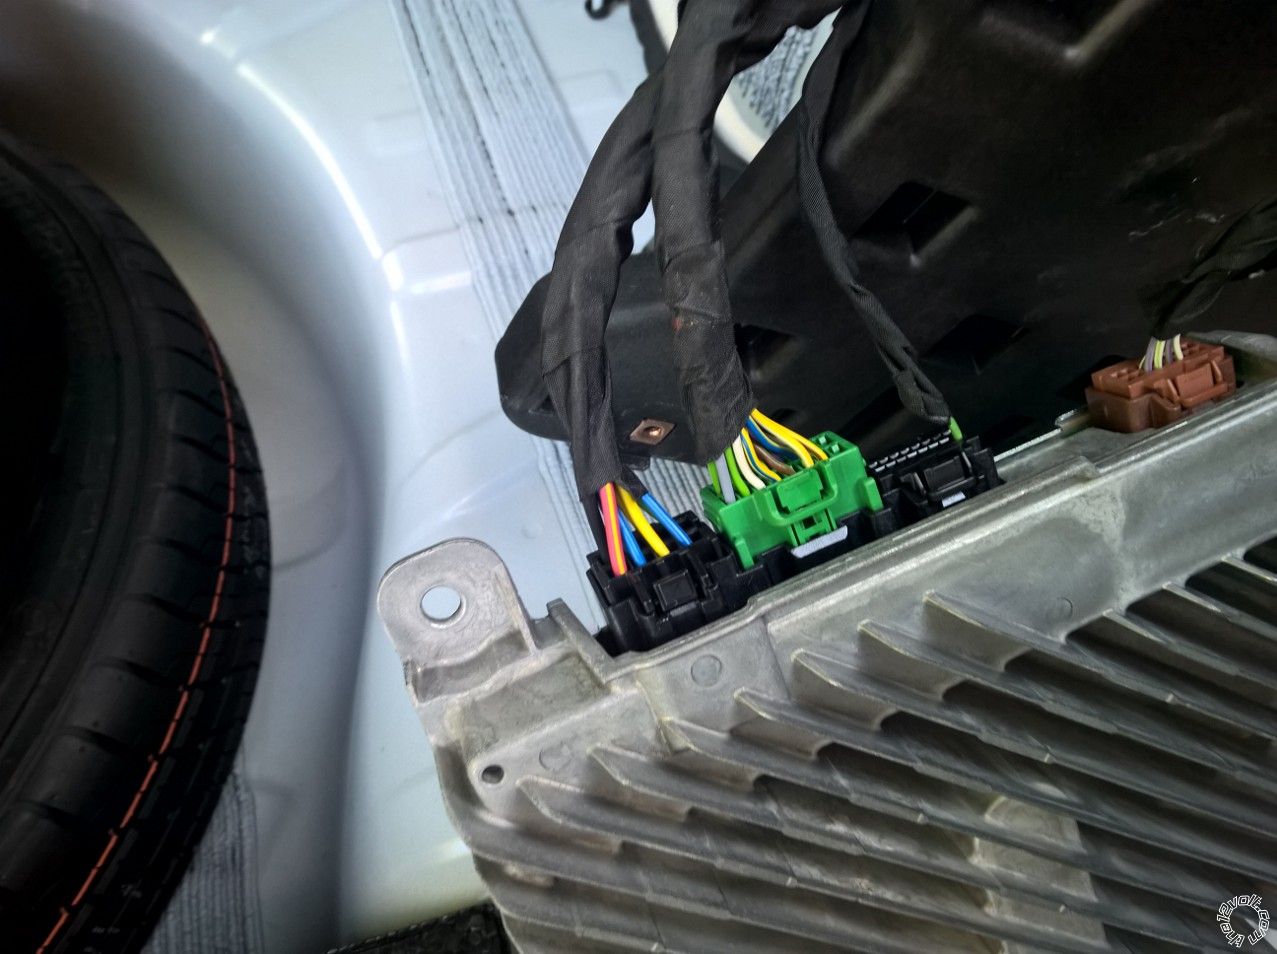 2014 9th Gen Chevrolet Impala, No Sound After Hi/Lo Install -- posted image.